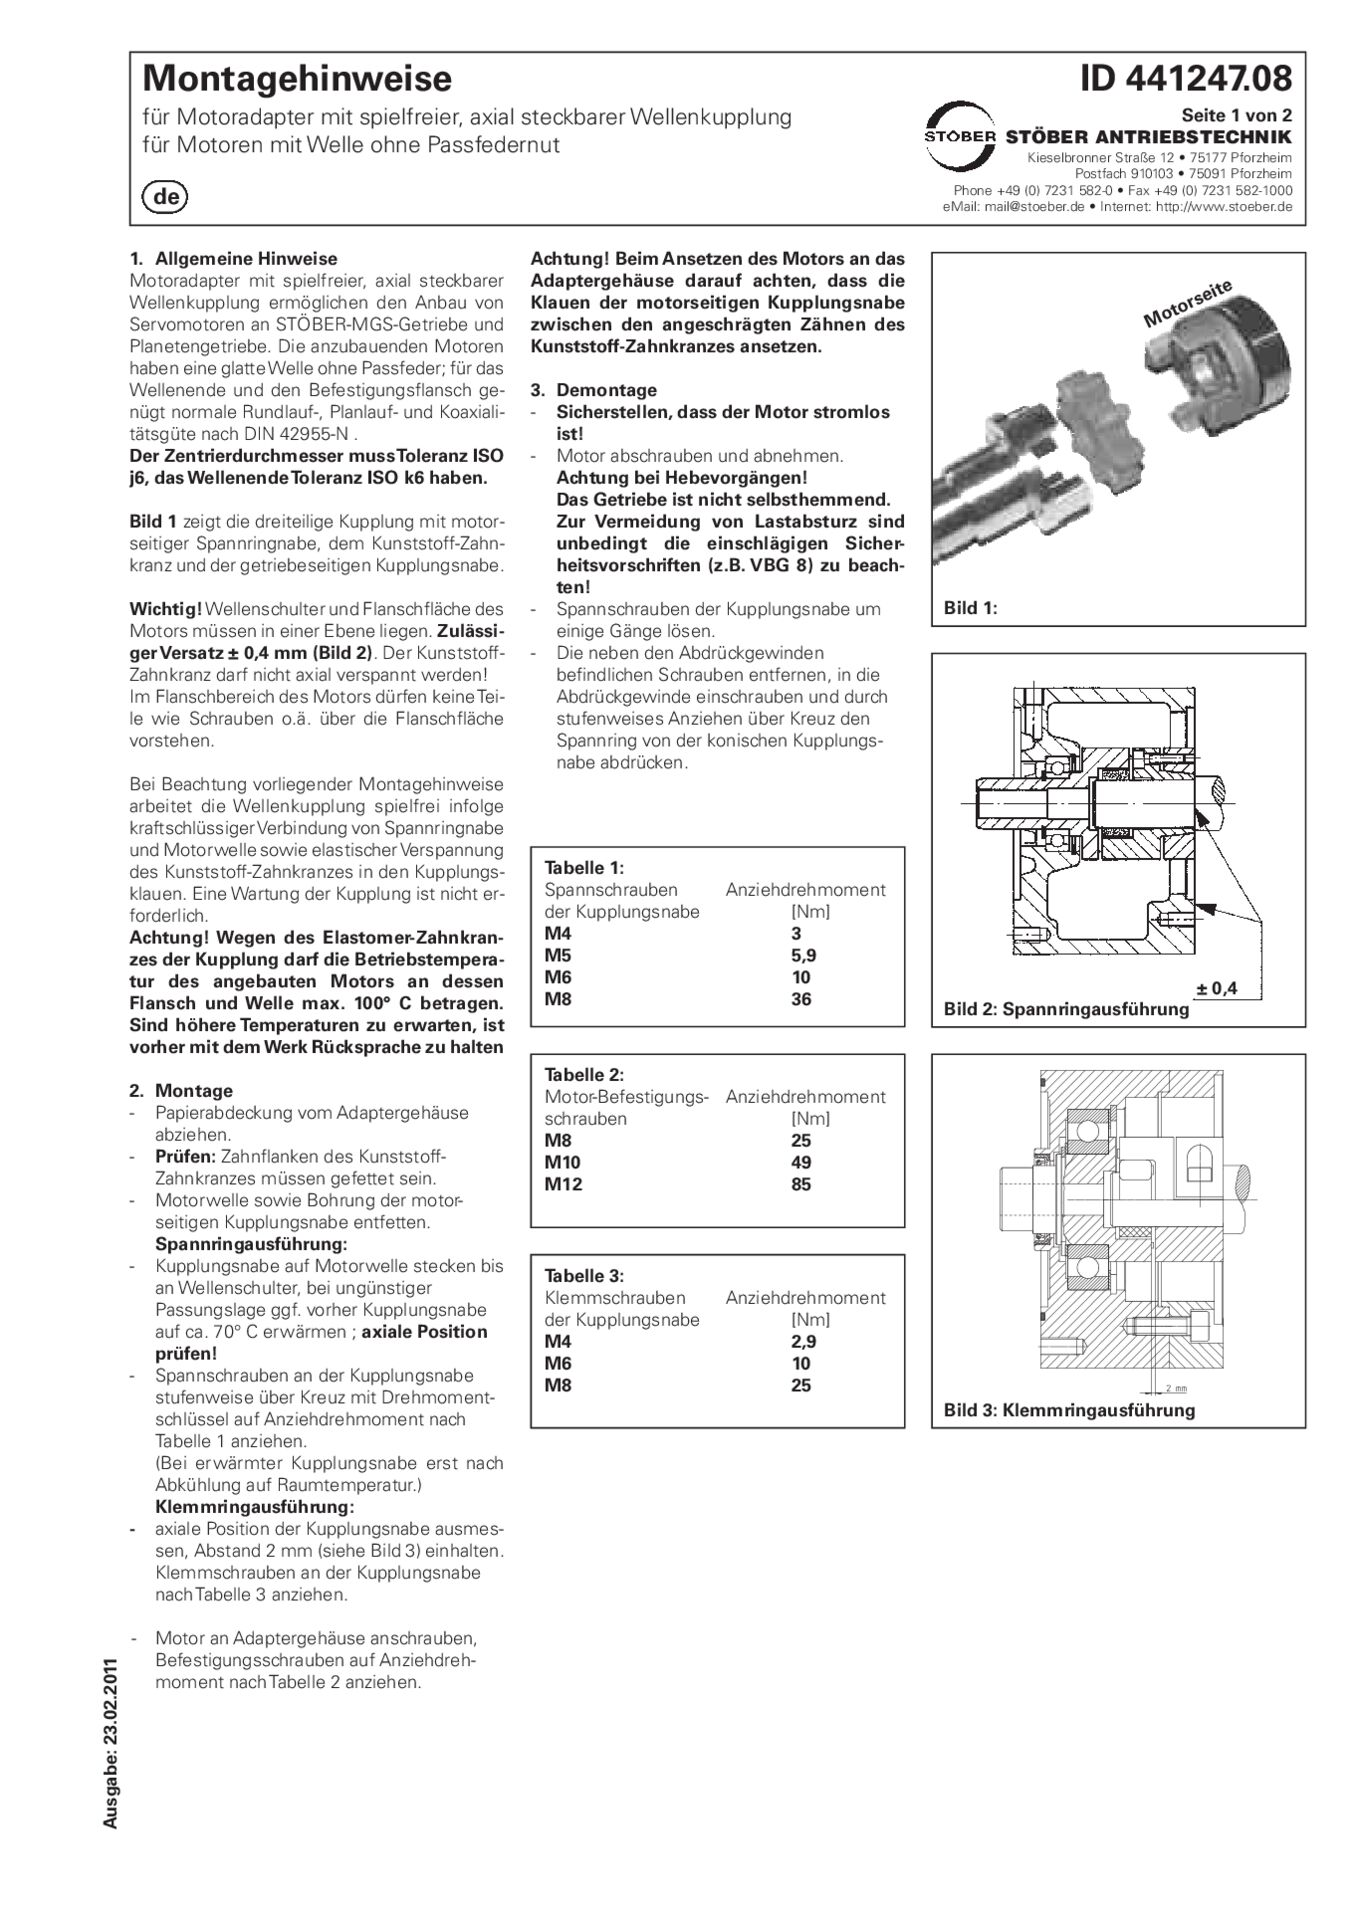 Montageanleitung Motoradapter mit axial steckbarer WellenkupplungAssembly instructions Motor adapter with axially plug-in coupling